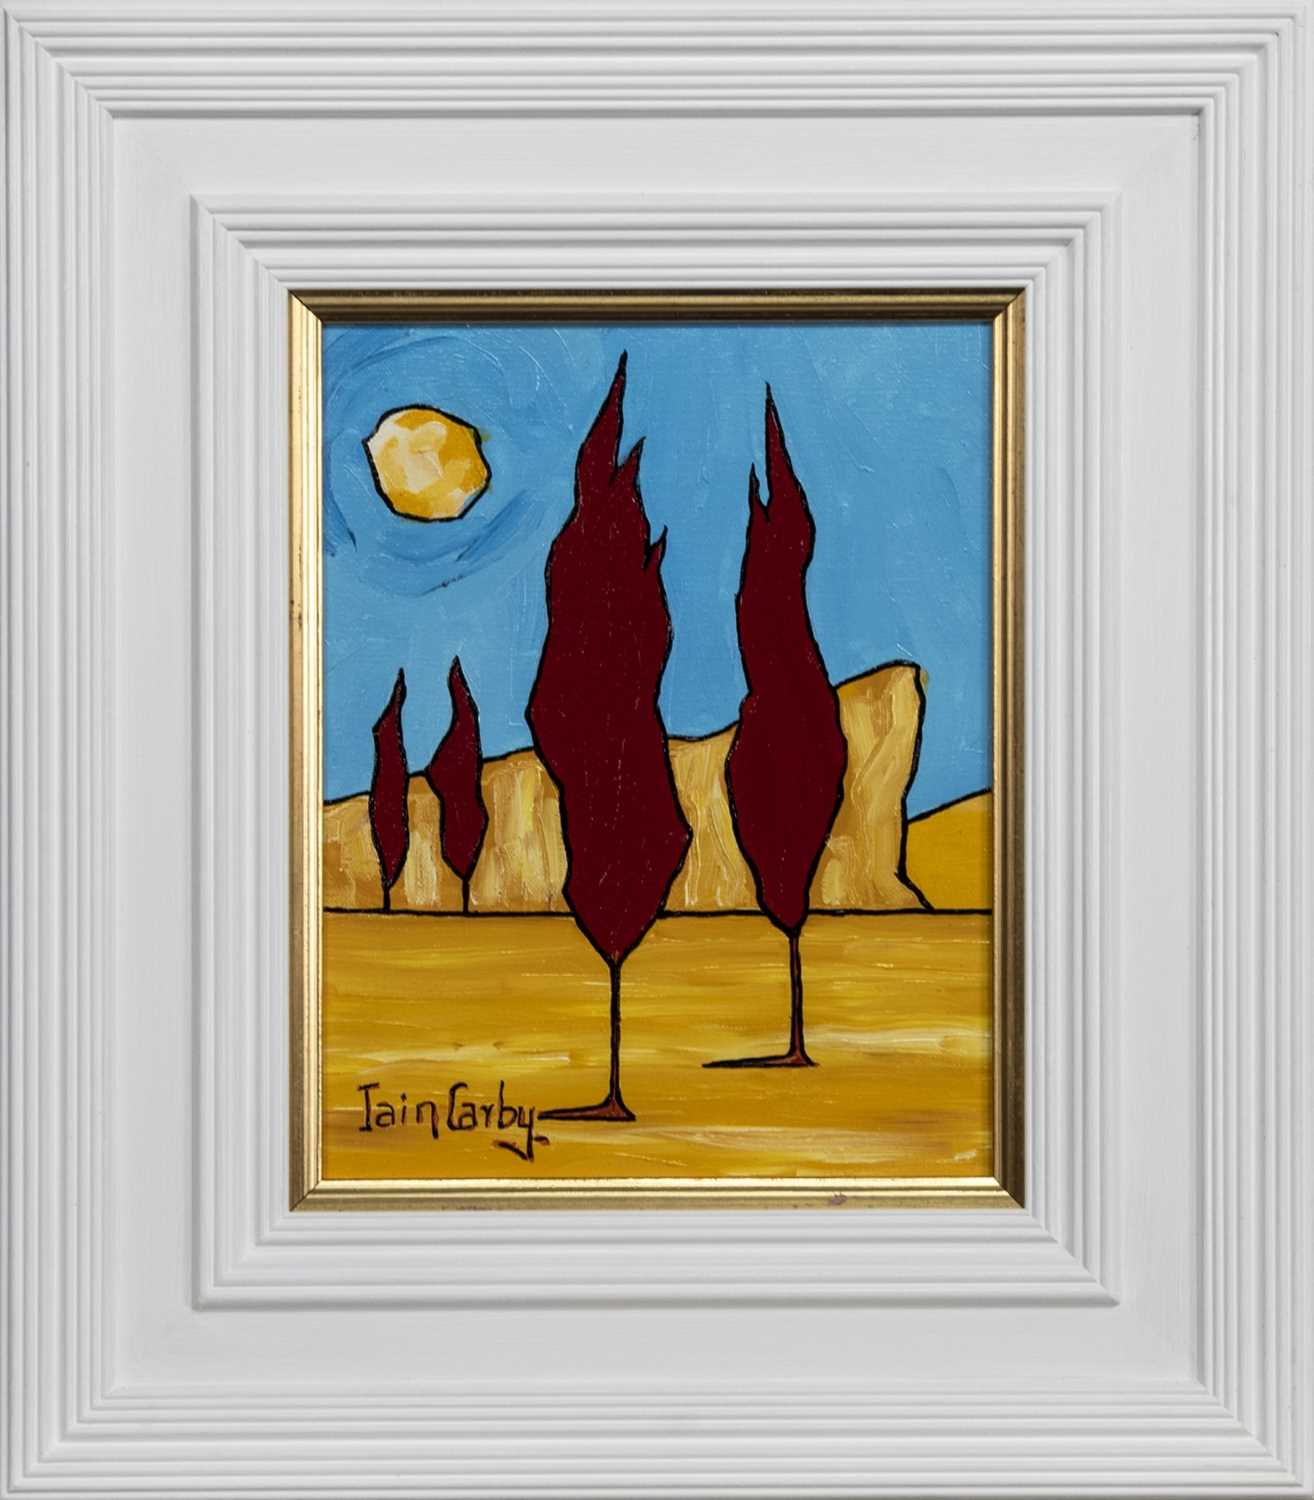 Lot 657 - RED TREES IN PAIRS AND THE MOON, AN OIL BY IAIN CARBY